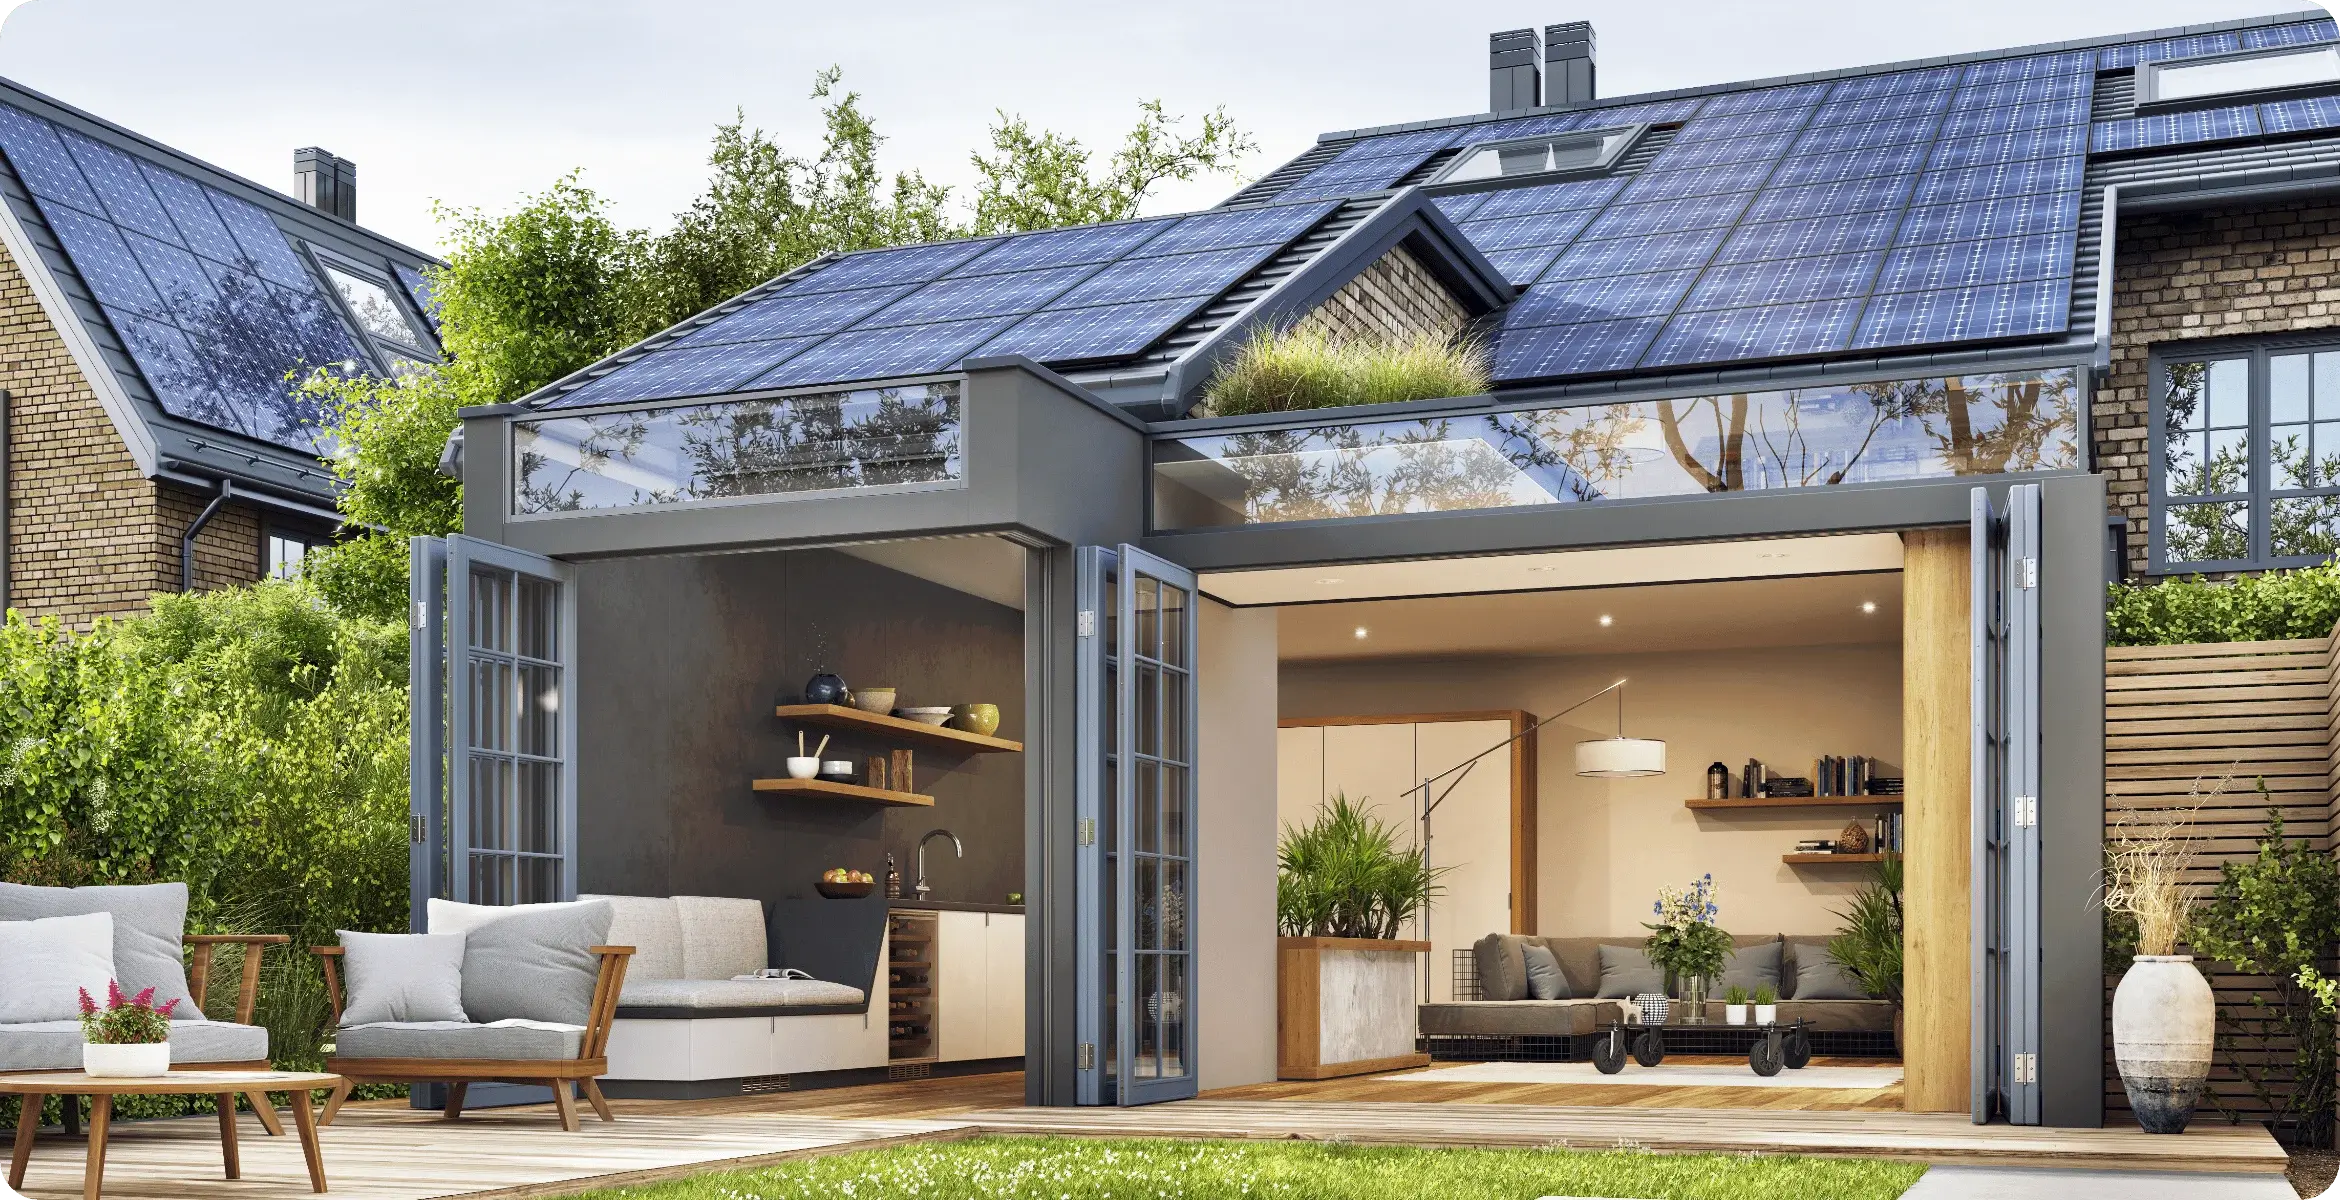 House with Solar Panels on top of the Roof